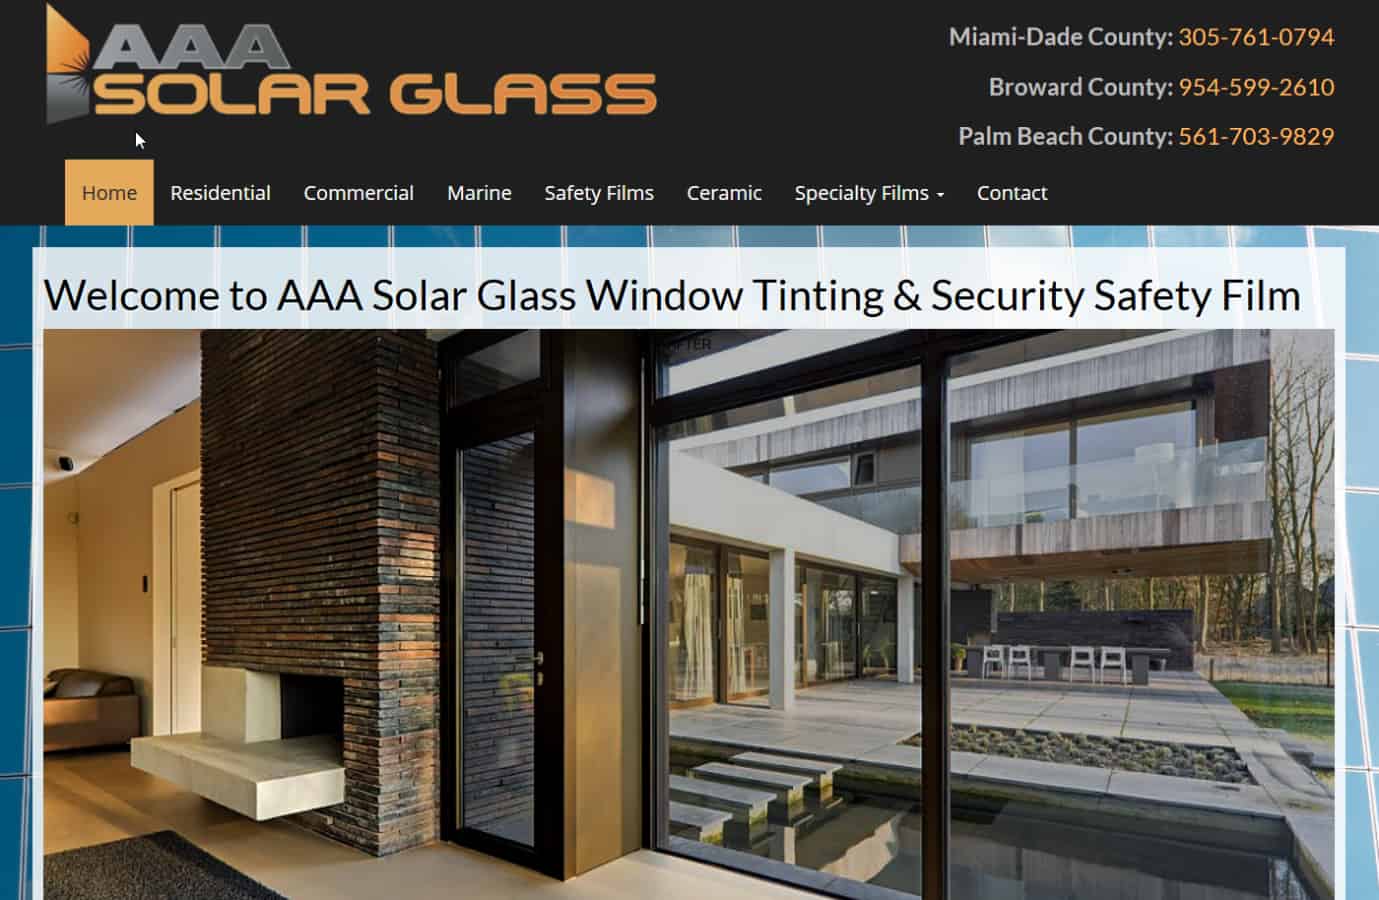 AAA Solar Glass & Window Tinting Ft. Lauderdale Website by iSatisfy.com